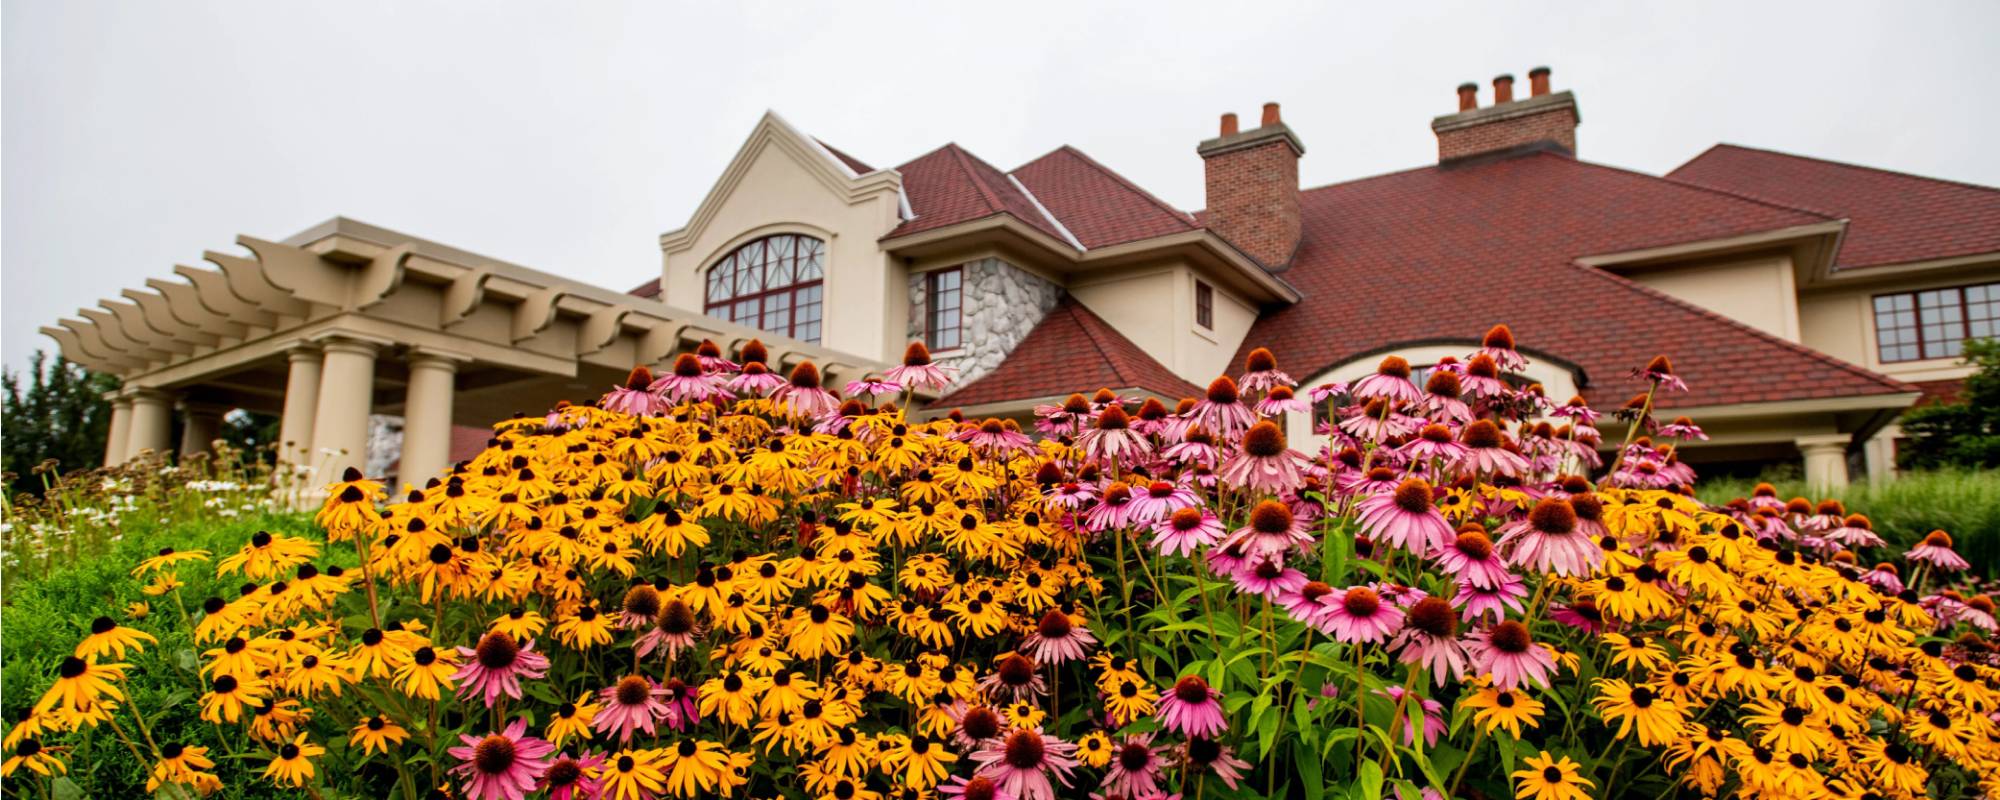 The Alumni House with colorful flowers in front.